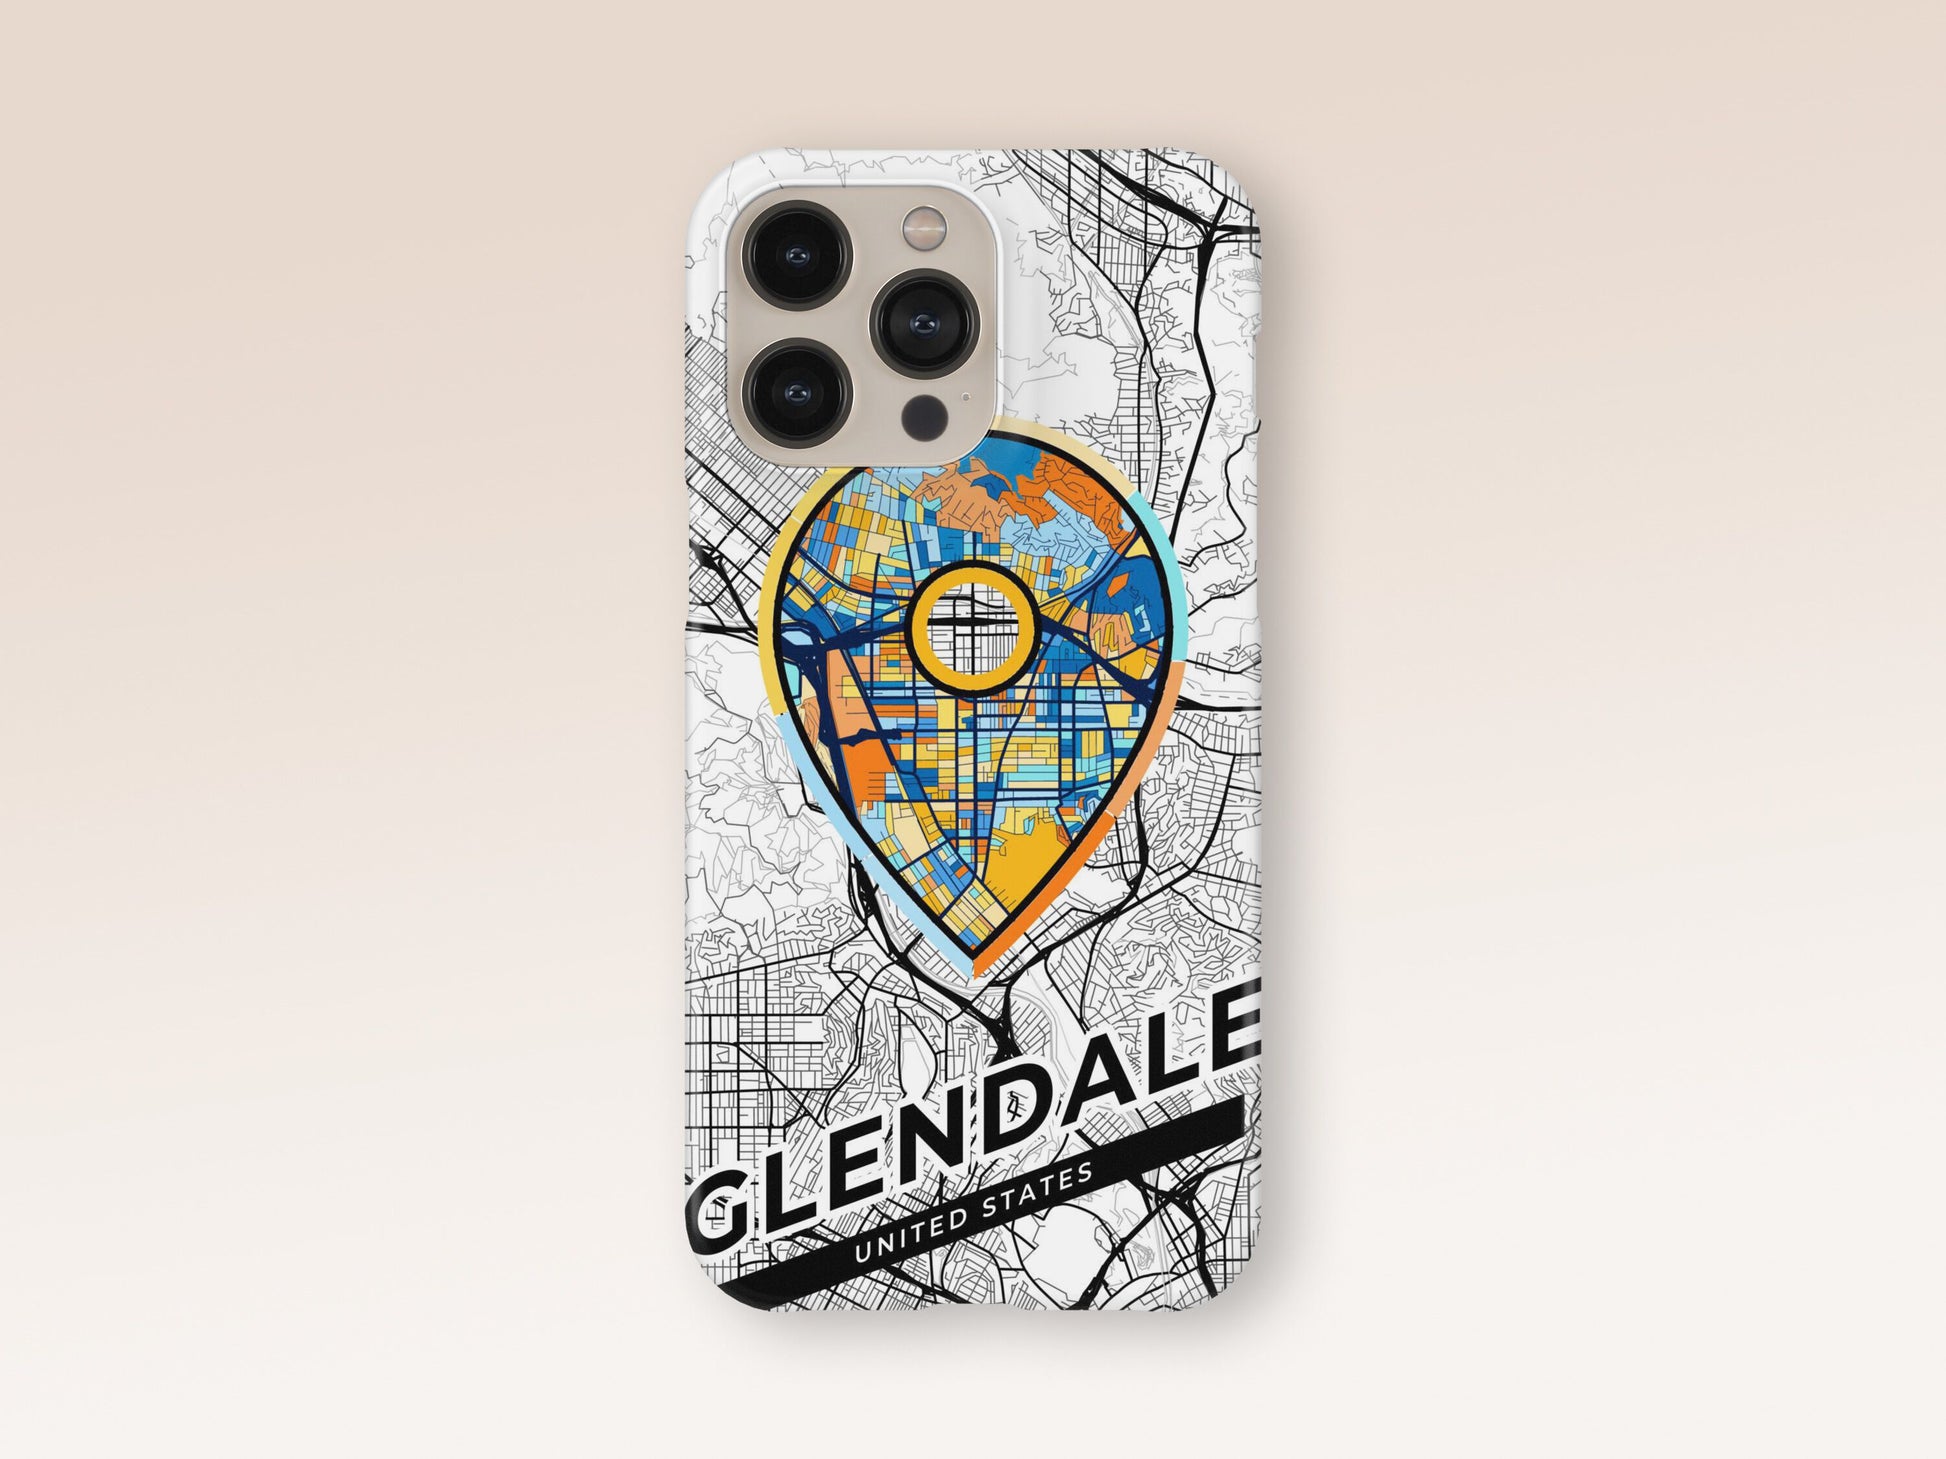 Glendale California slim phone case with colorful icon. Birthday, wedding or housewarming gift. Couple match cases. 1